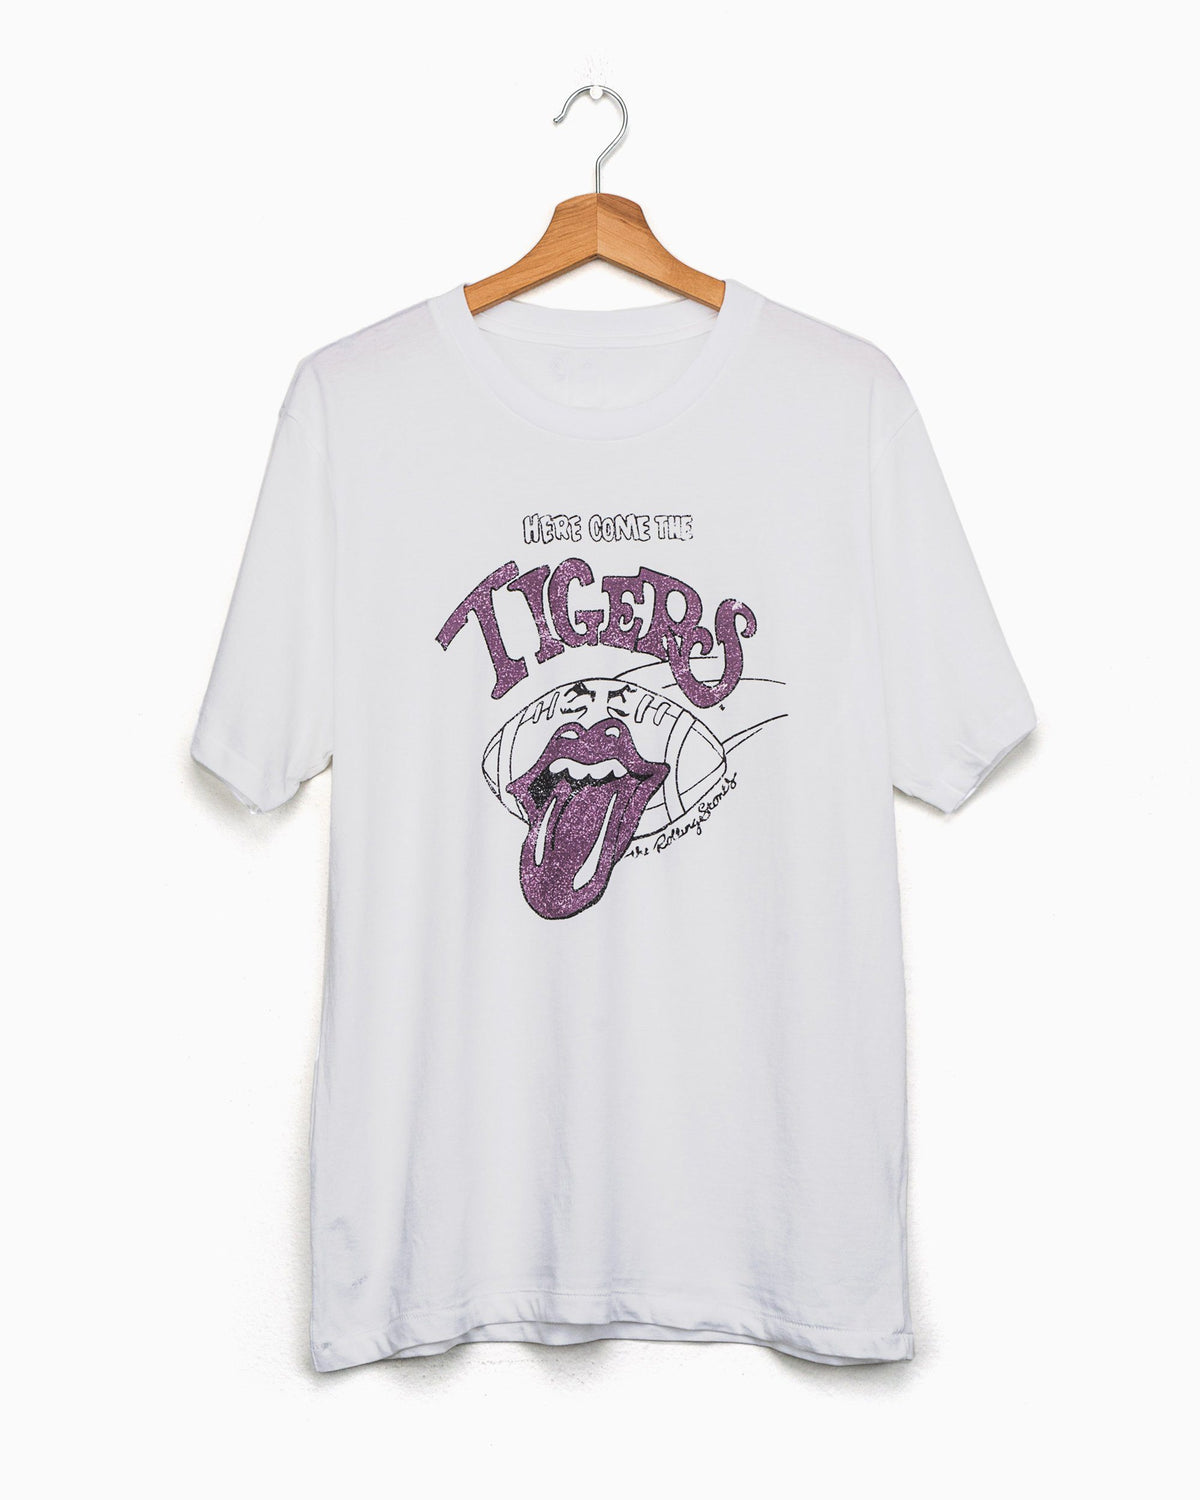 Rolling Stones Here Come the Tigers White Tee (4522379870311)